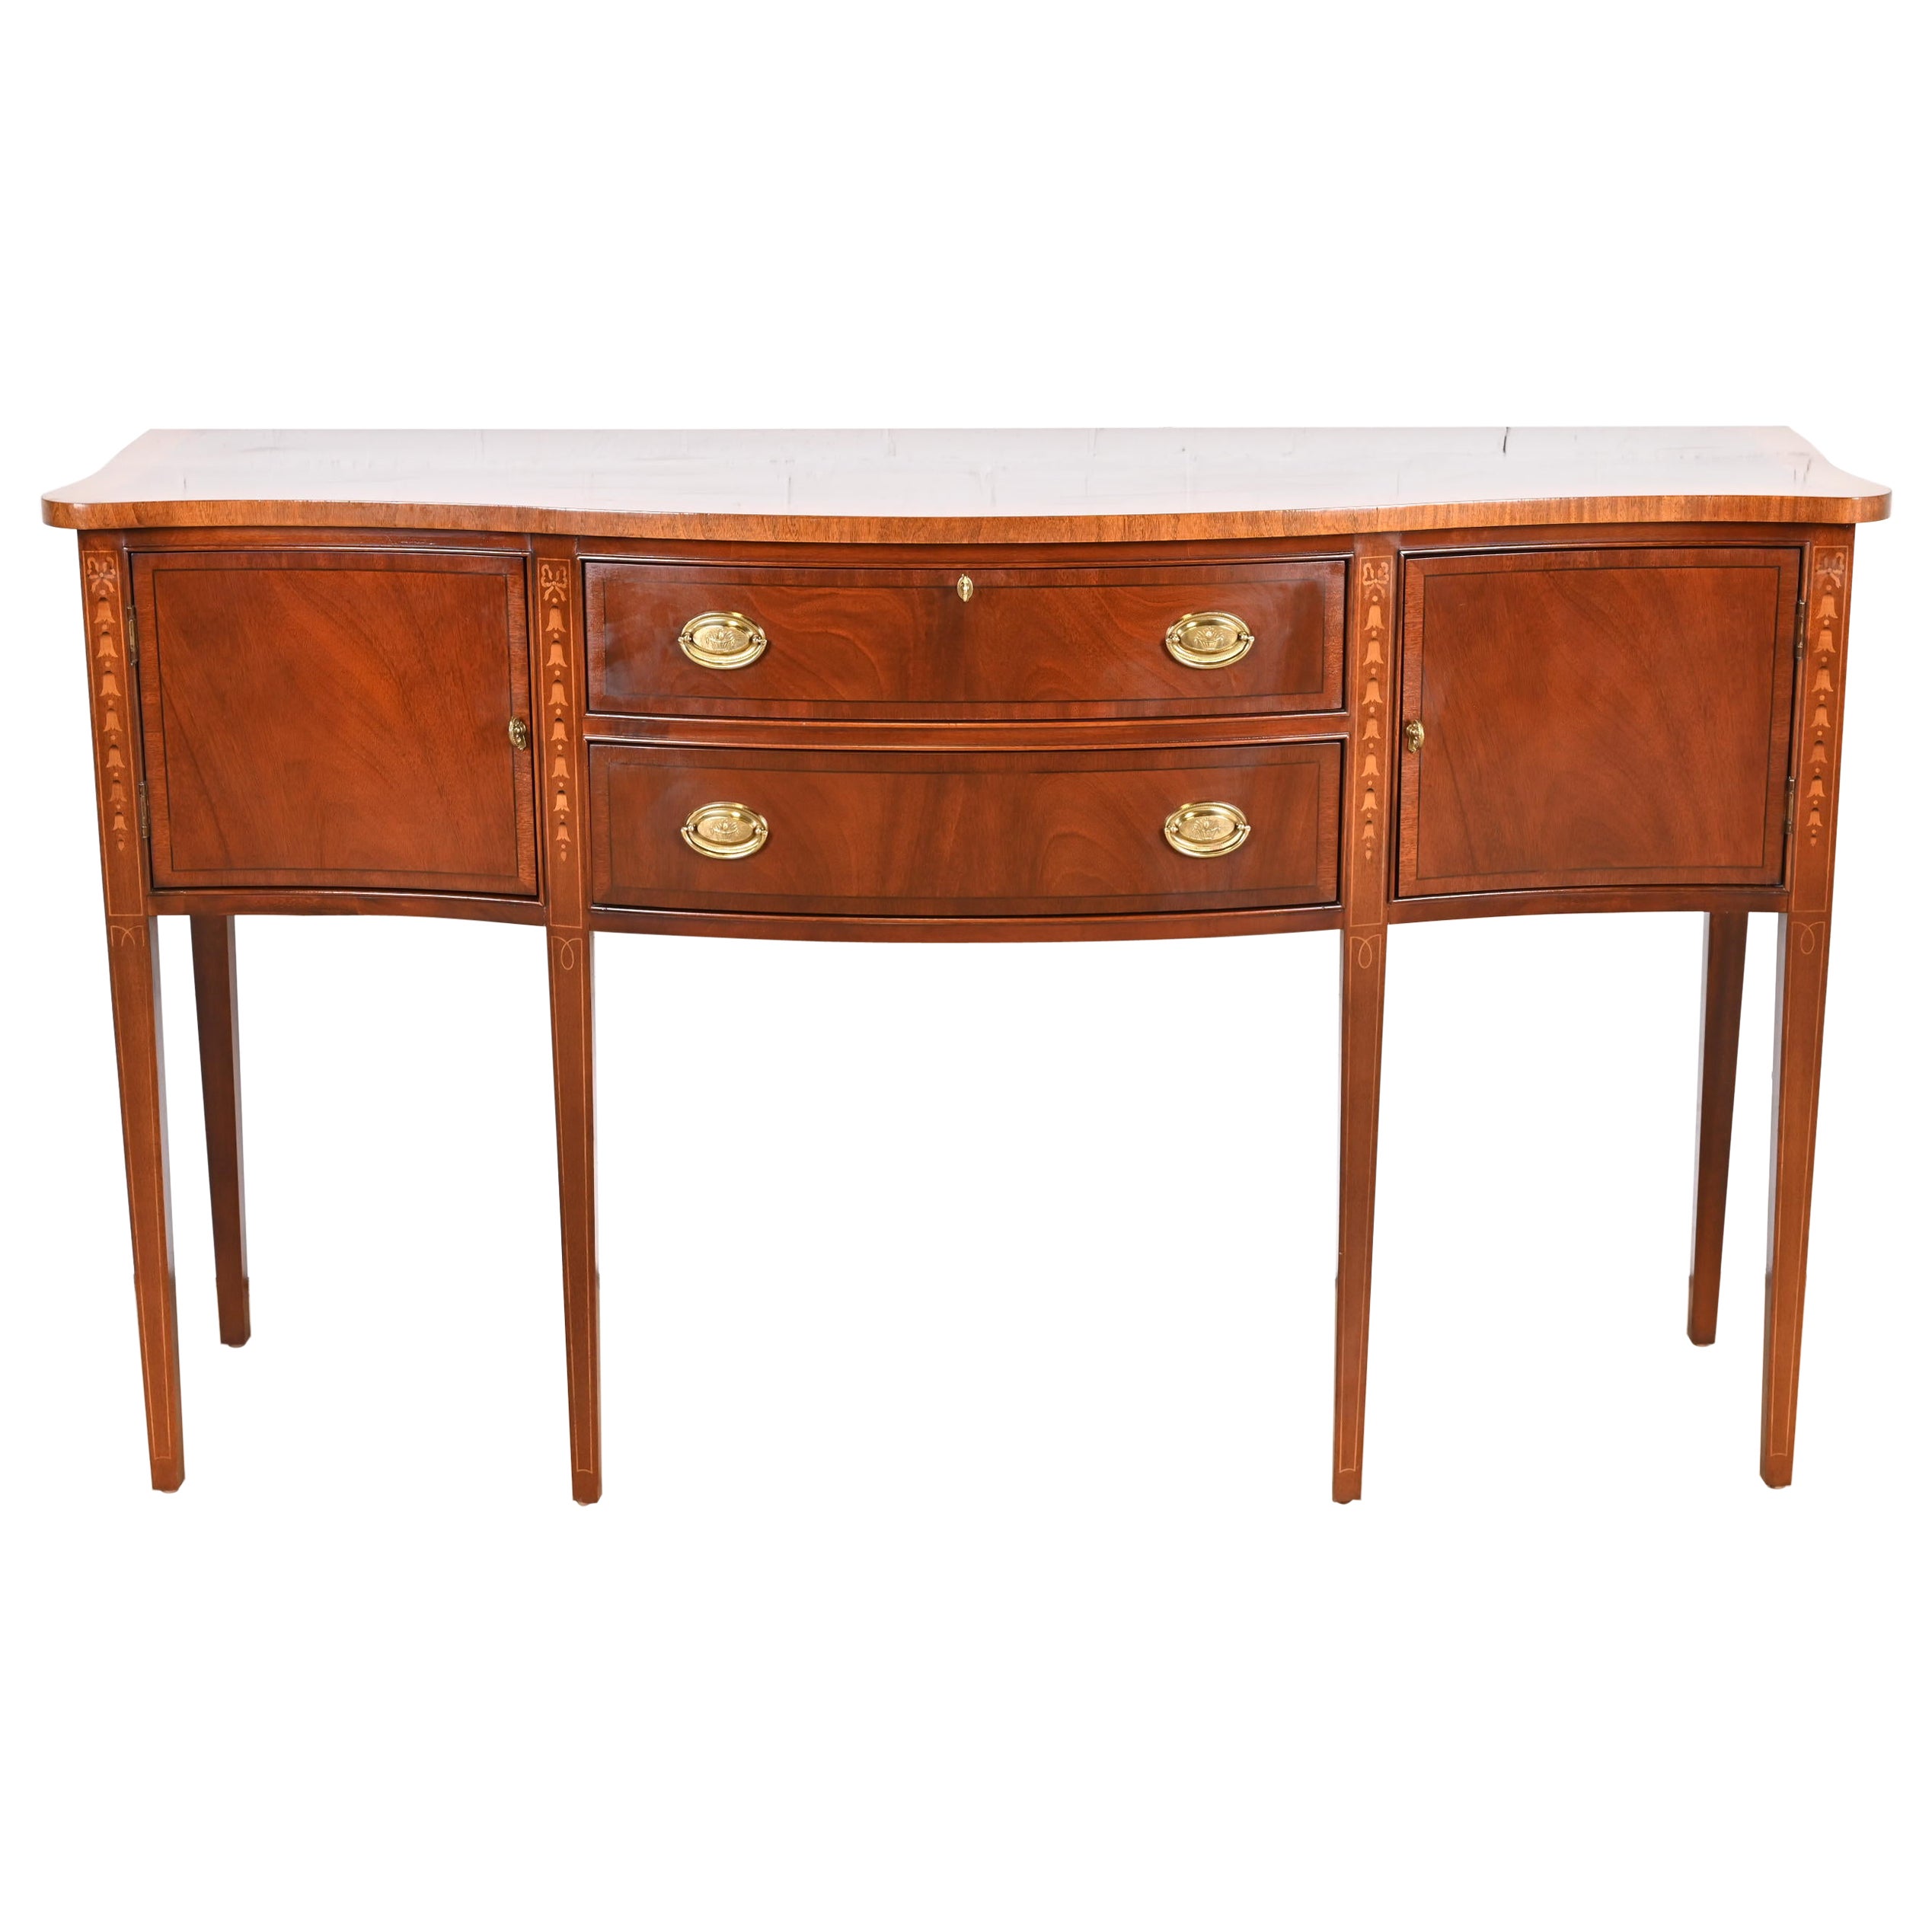 Hepplewhite Inlaid Mahogany Serpentine Front Sideboard Credenza For Sale